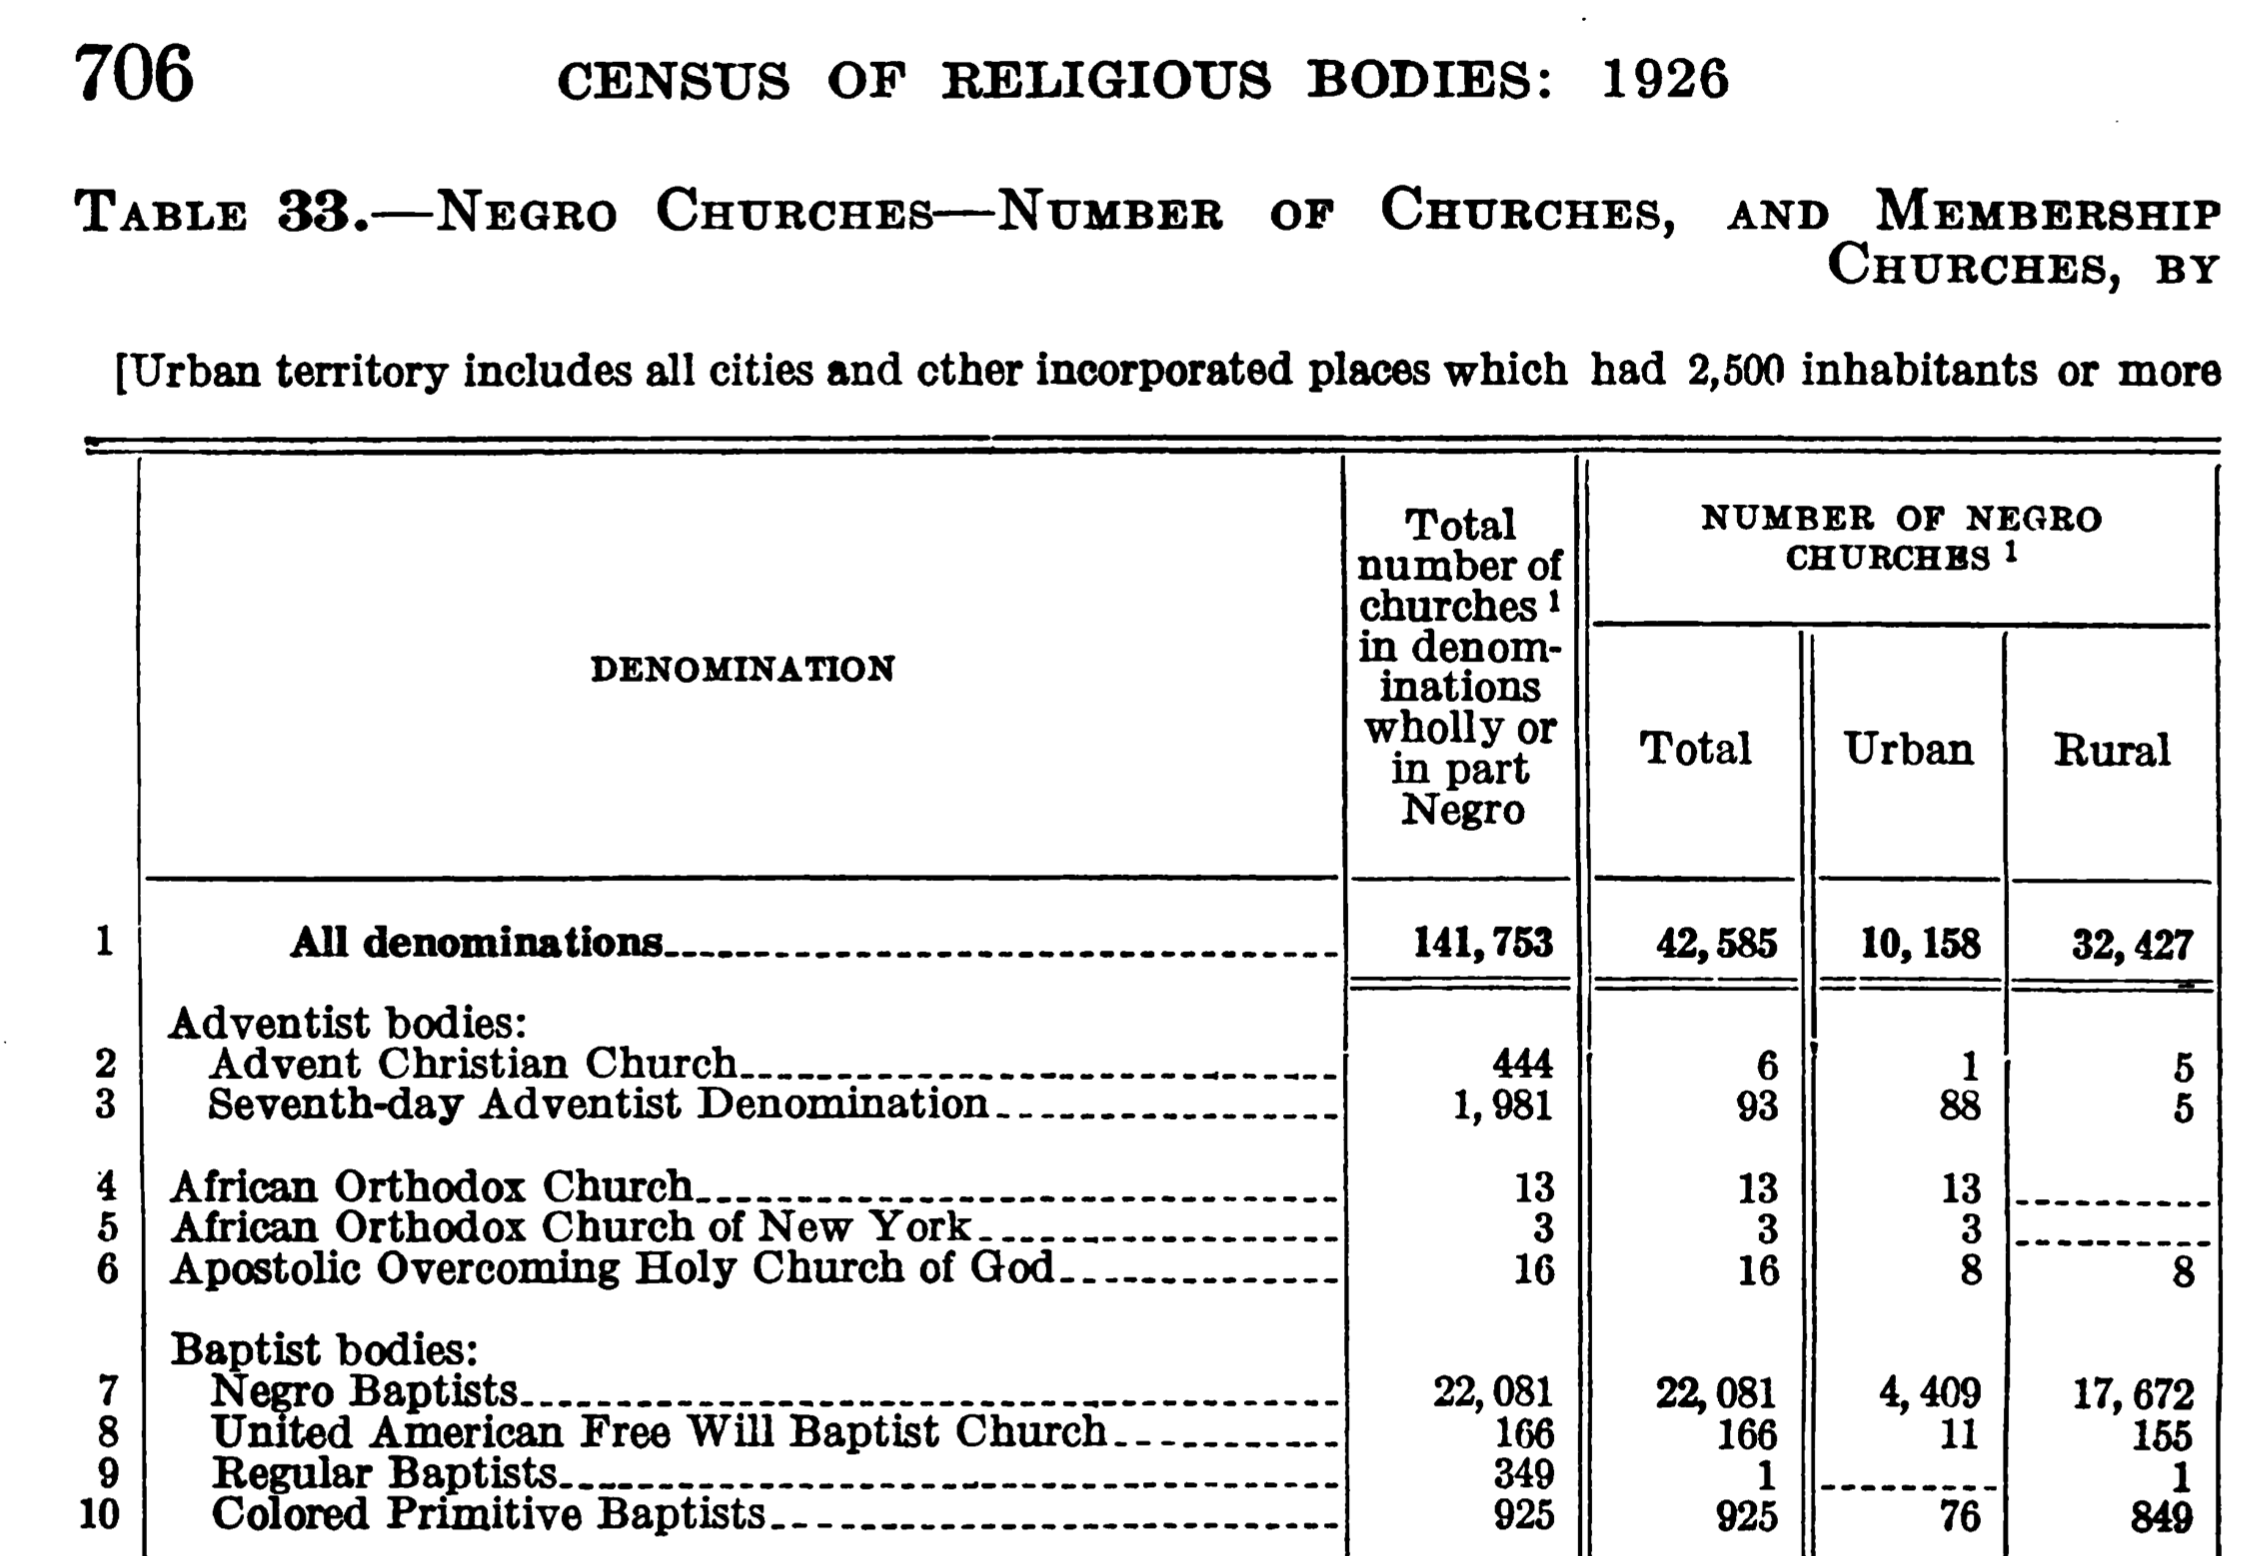 A detail from the published census reports.